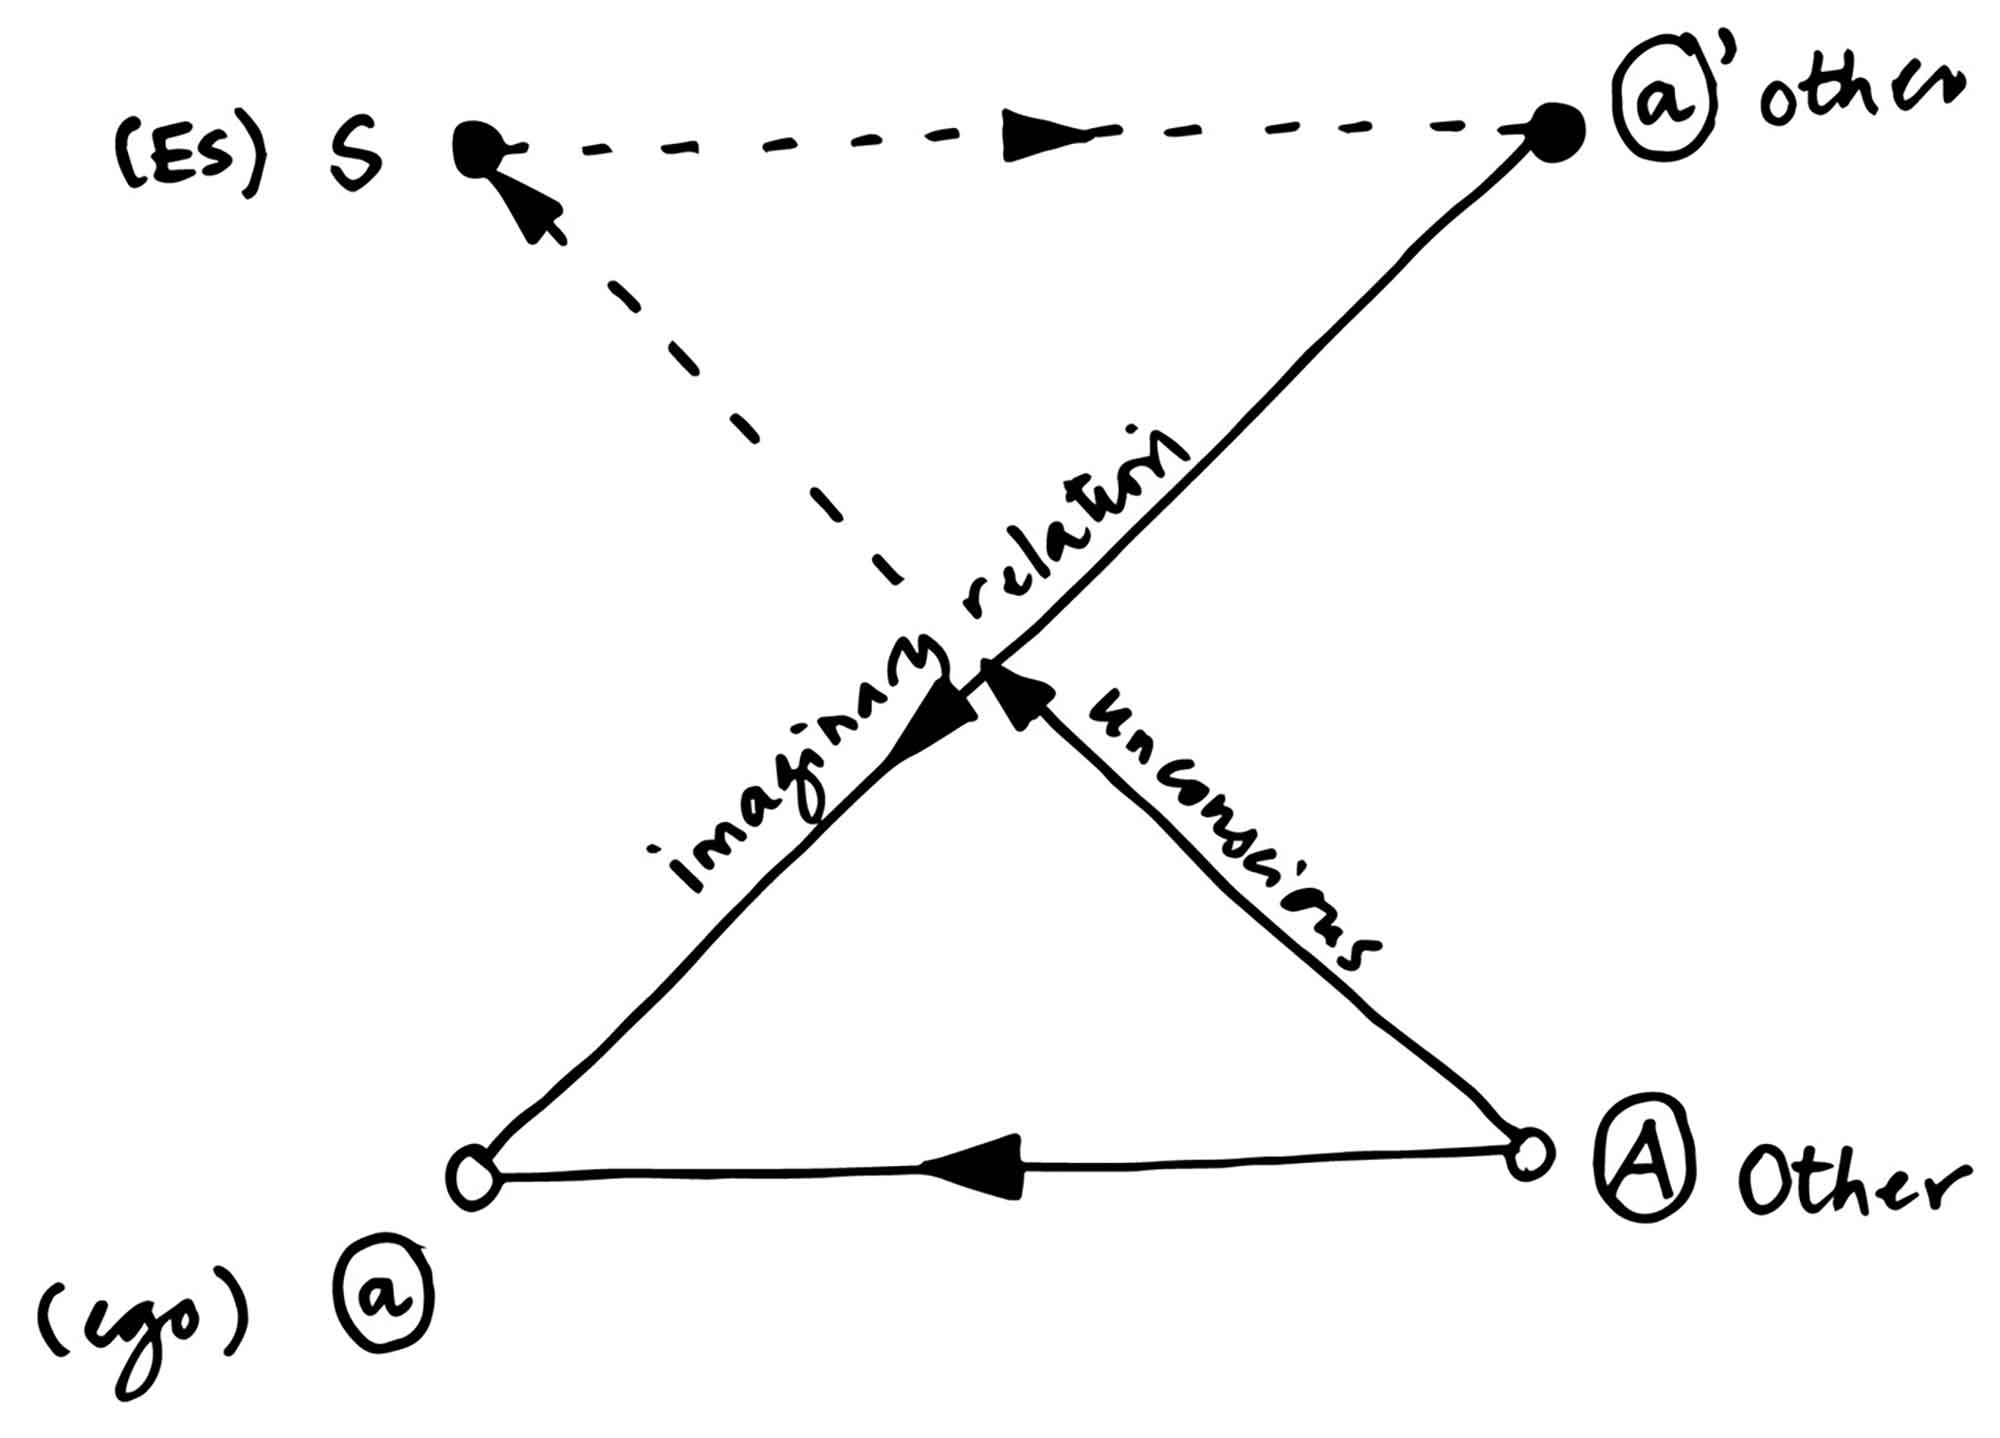 Jacques Lacan’s Schema L. Adapted from Jacques Lacan, Seminar II: The Ego in Freud’s Theory and in the Technique of Psychoanalysis, 1954– 1955 (Le séminaire, livre II: Le moi dans la théorie de Freud et dans la technique de la psychanalyse 1954–1955 [1978]), ed. by Jacques-Alain Miller, tr. by Sylvana Tomaselli, London: W. W. Norton, 1991, p. 109.